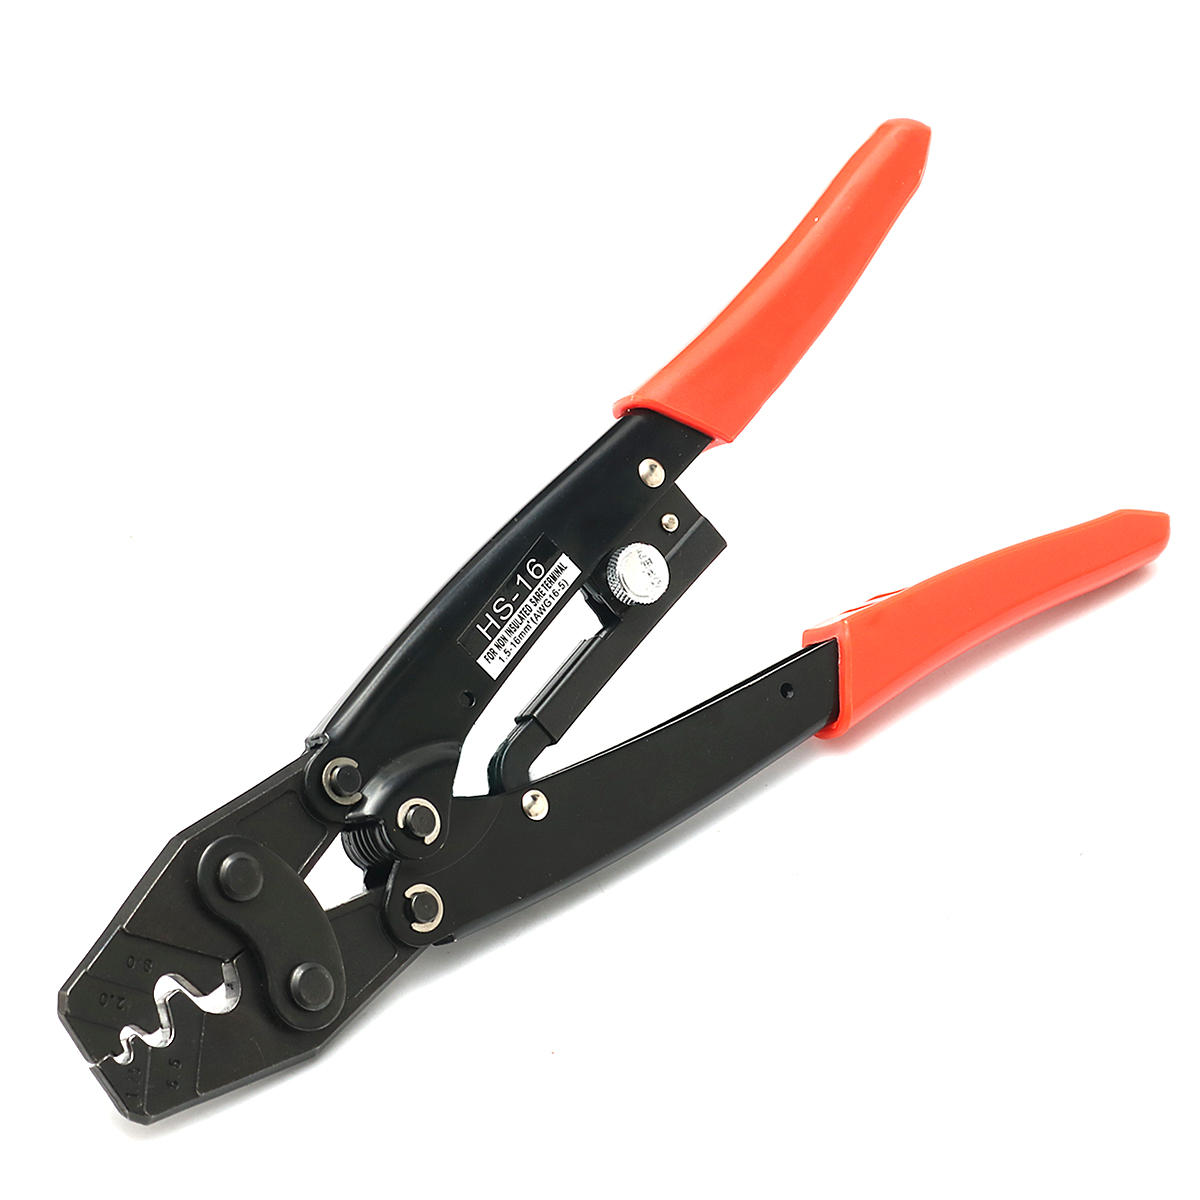 Terminal Crimper Pliers Hand Tool for Crimping Cable 16mm² Wire Stripper UK 